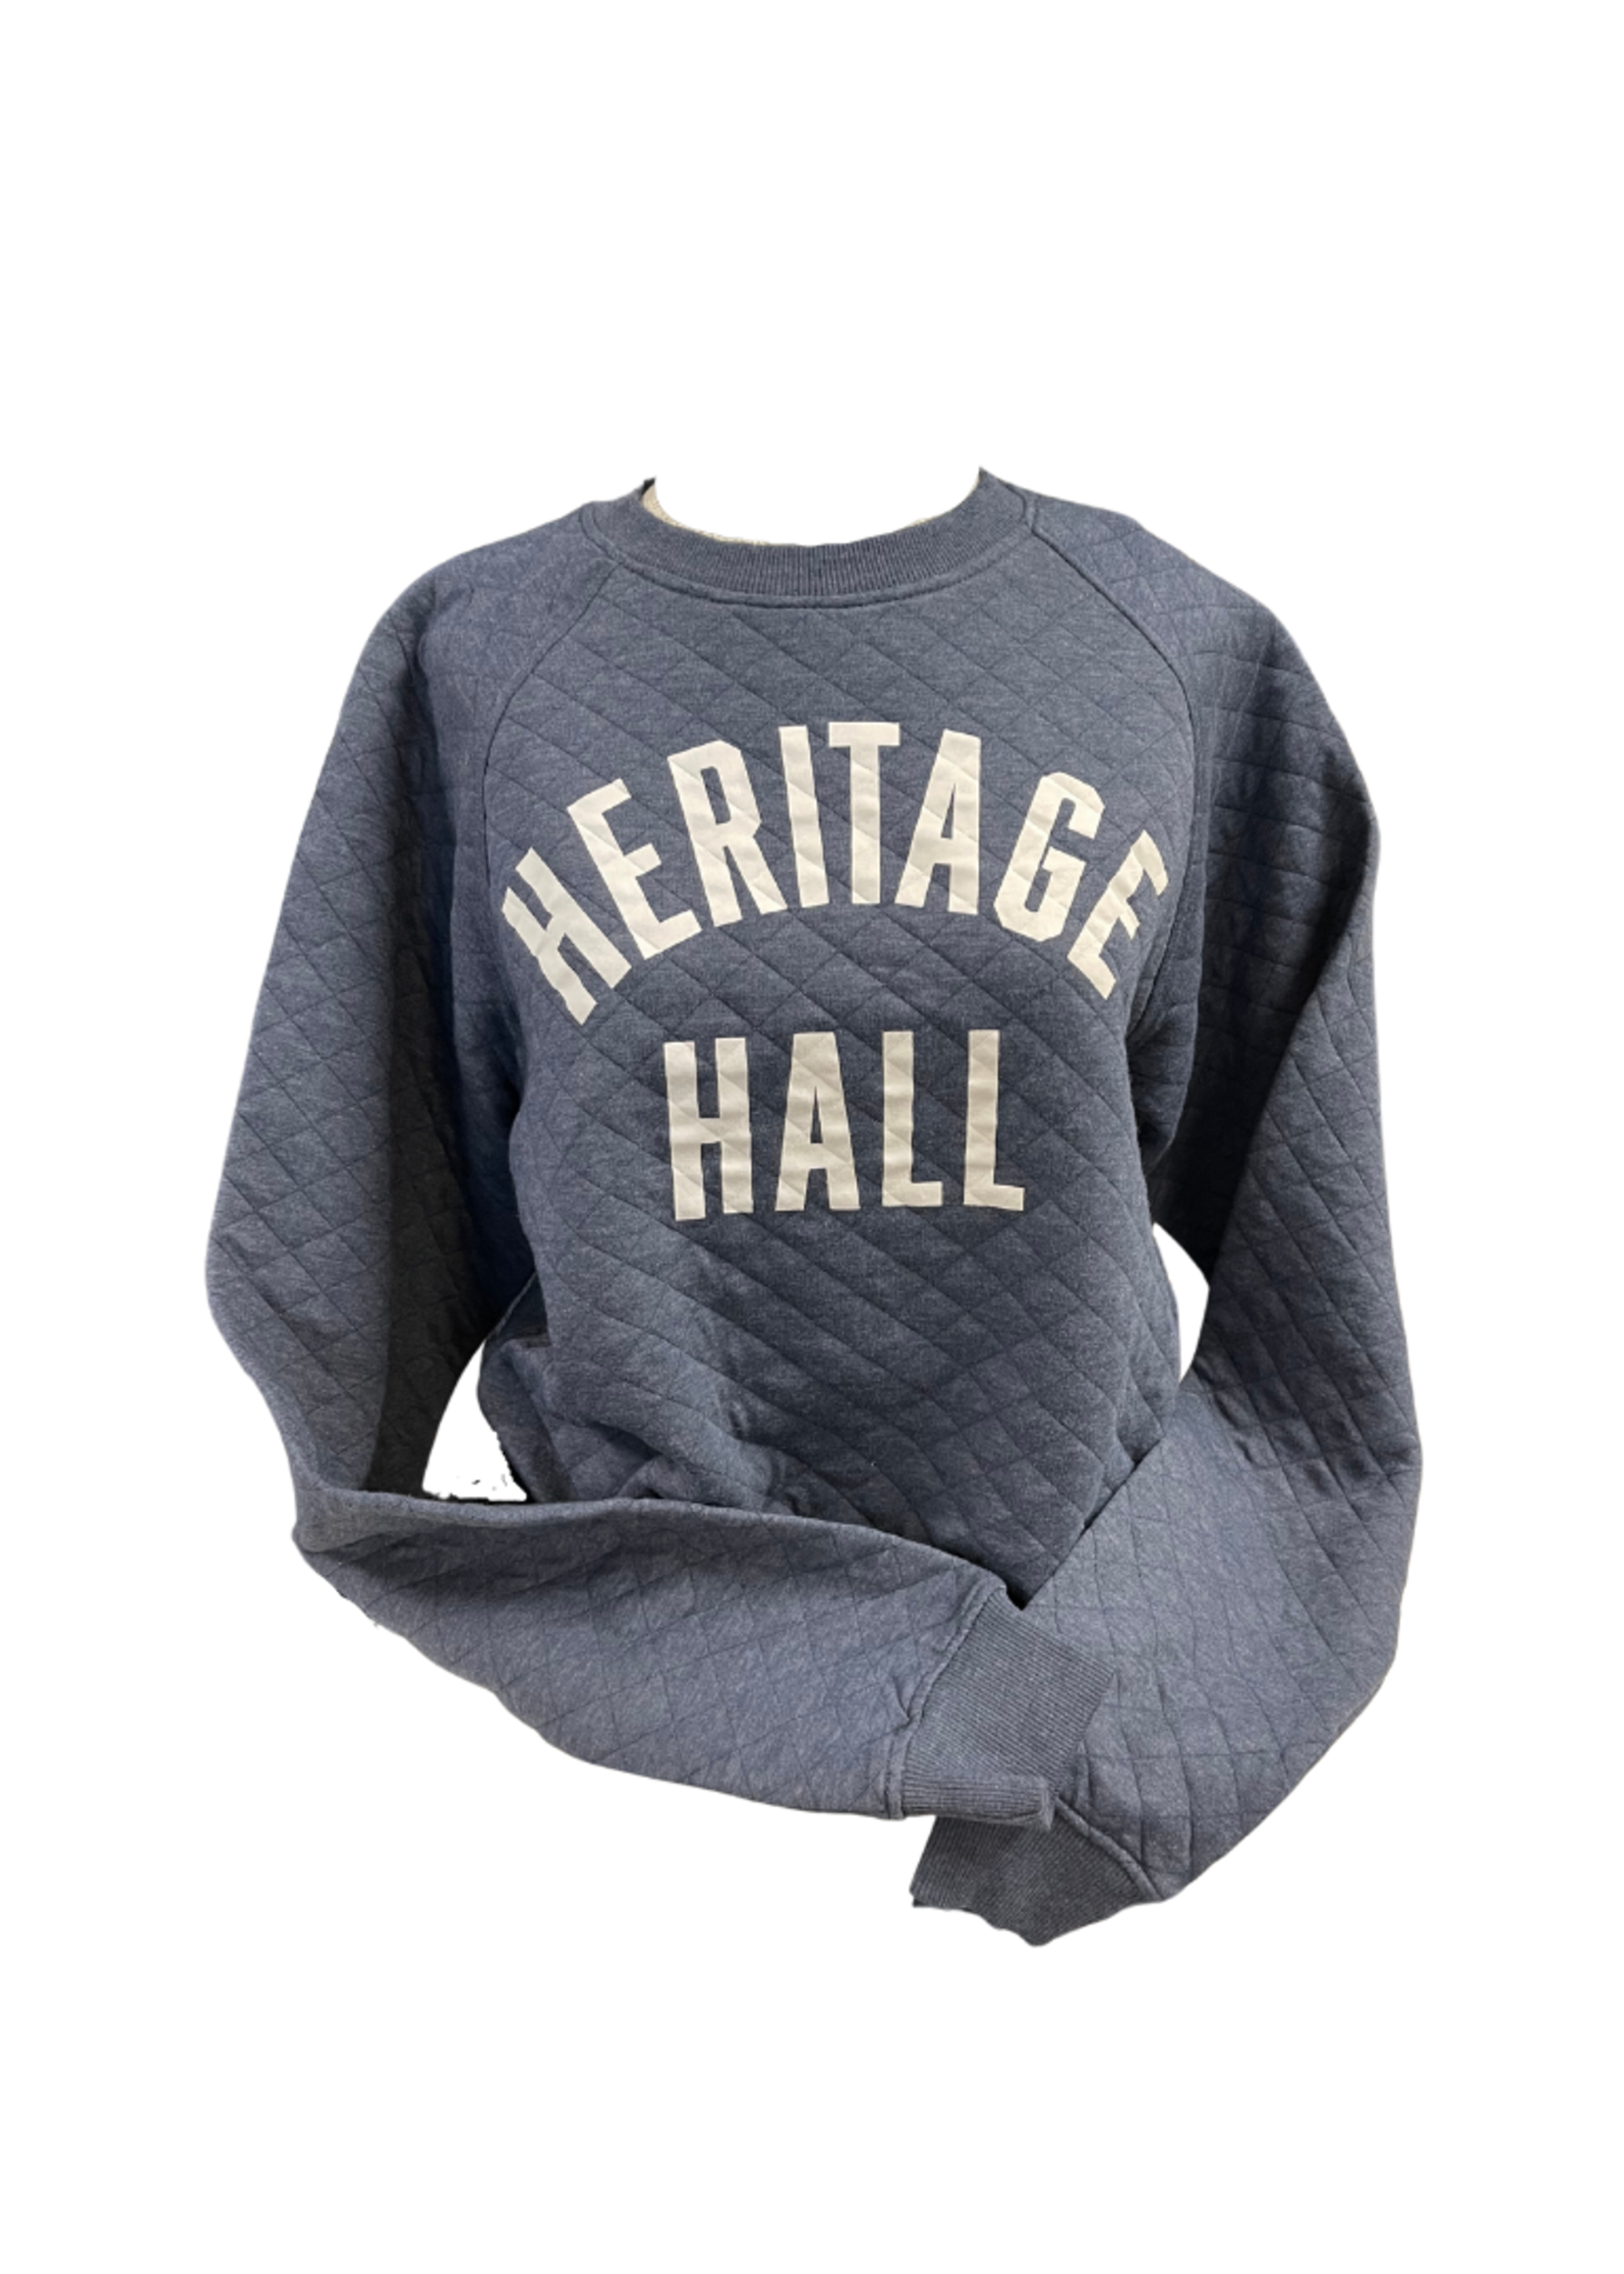 League Adult Quilted Sweatshirt Heritage Hall